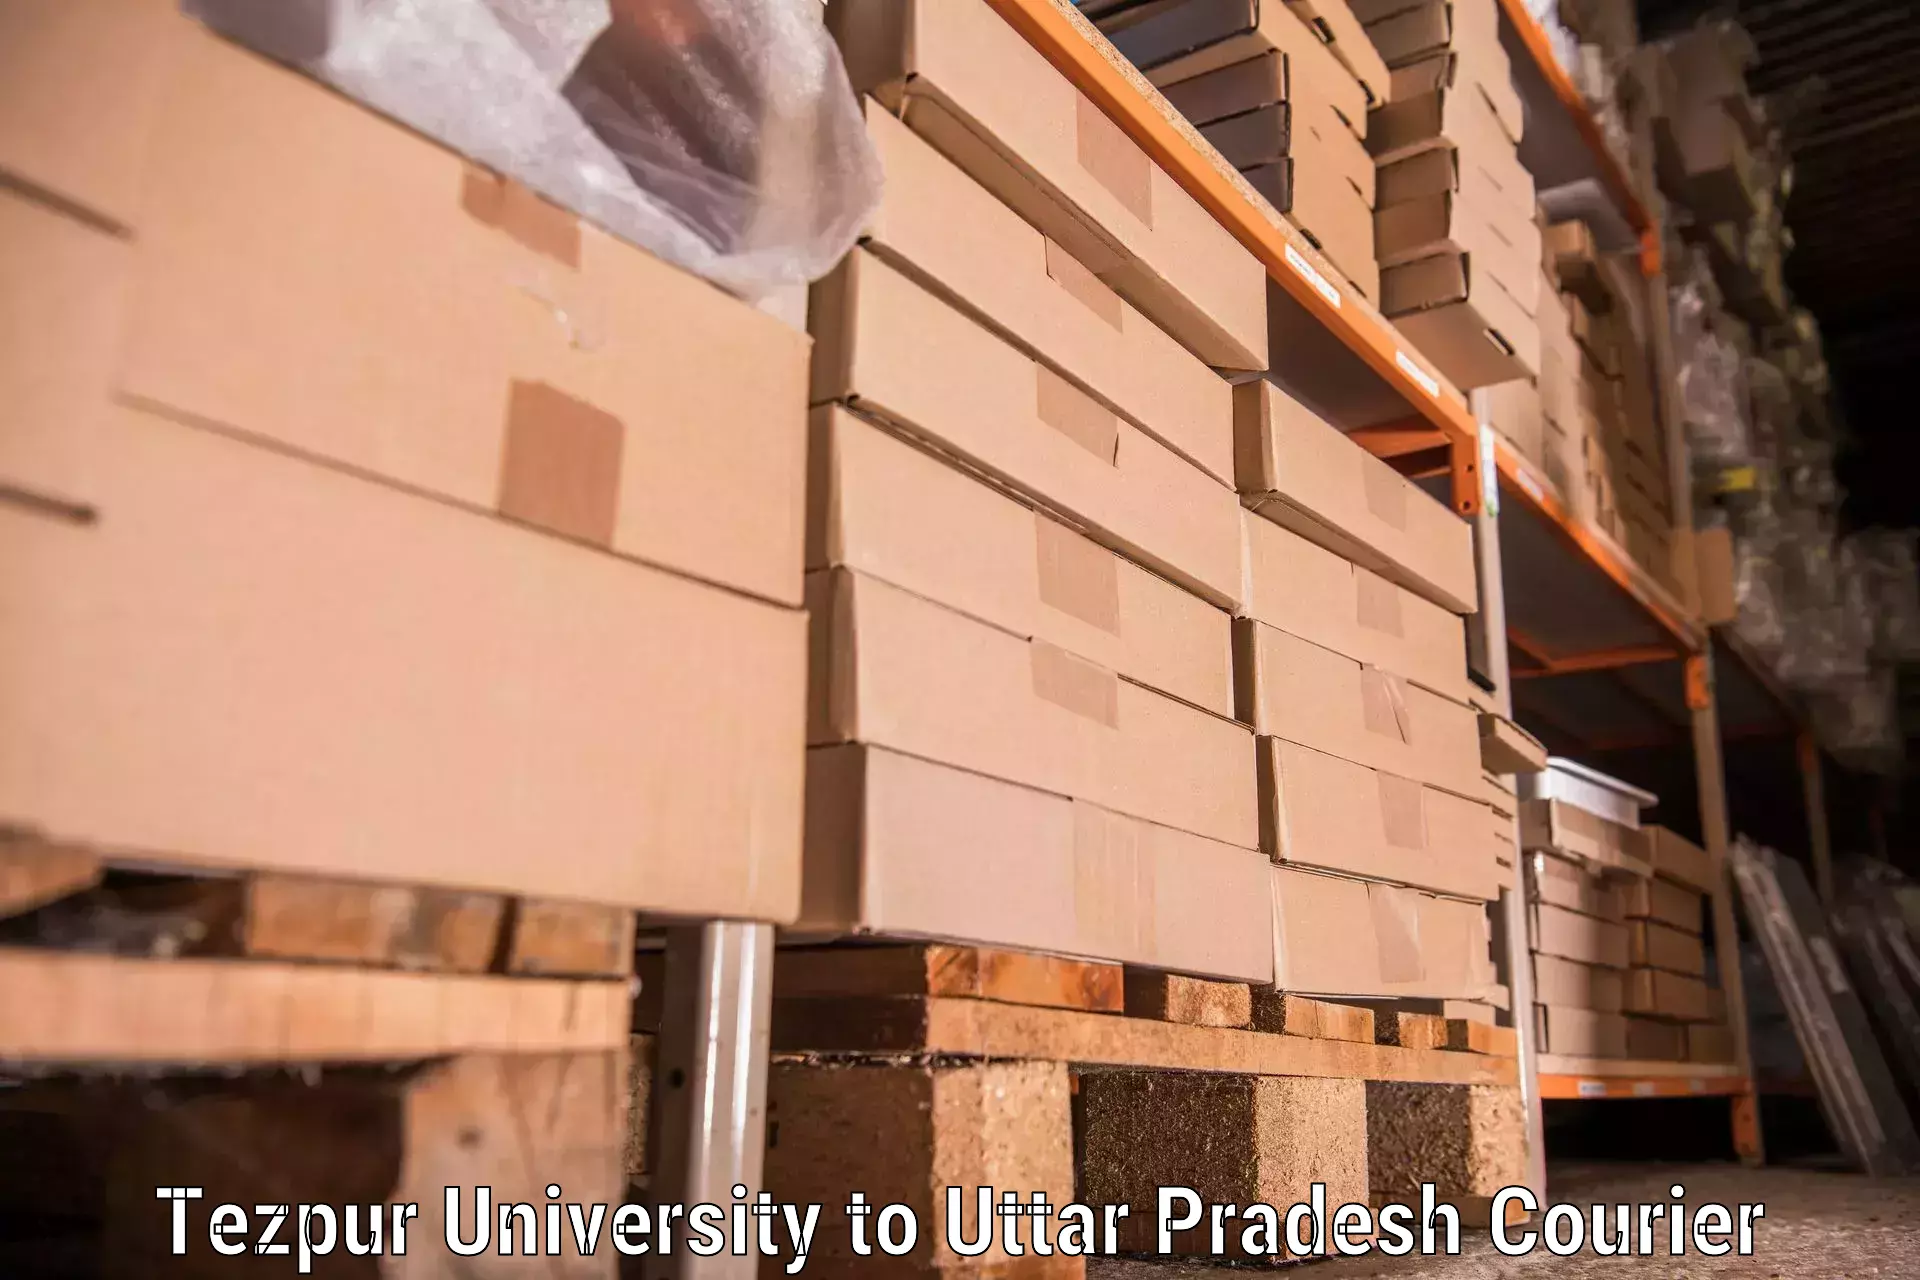 Quality household movers Tezpur University to Ghatampur